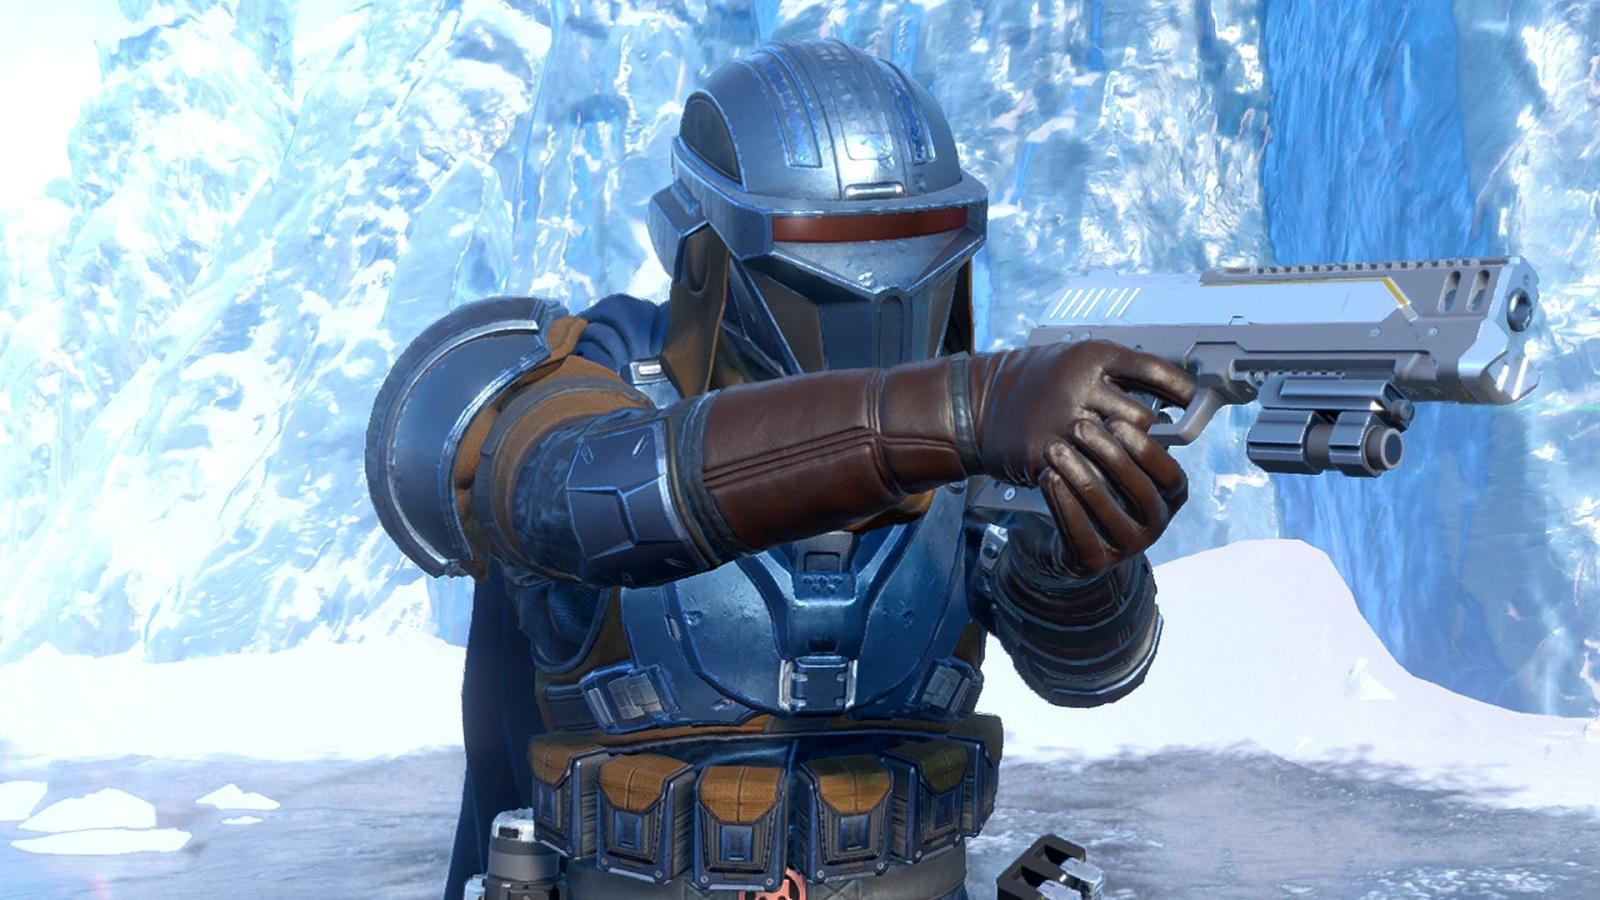 Helldiver wearing the CW-4 Arctic Ranger armor set